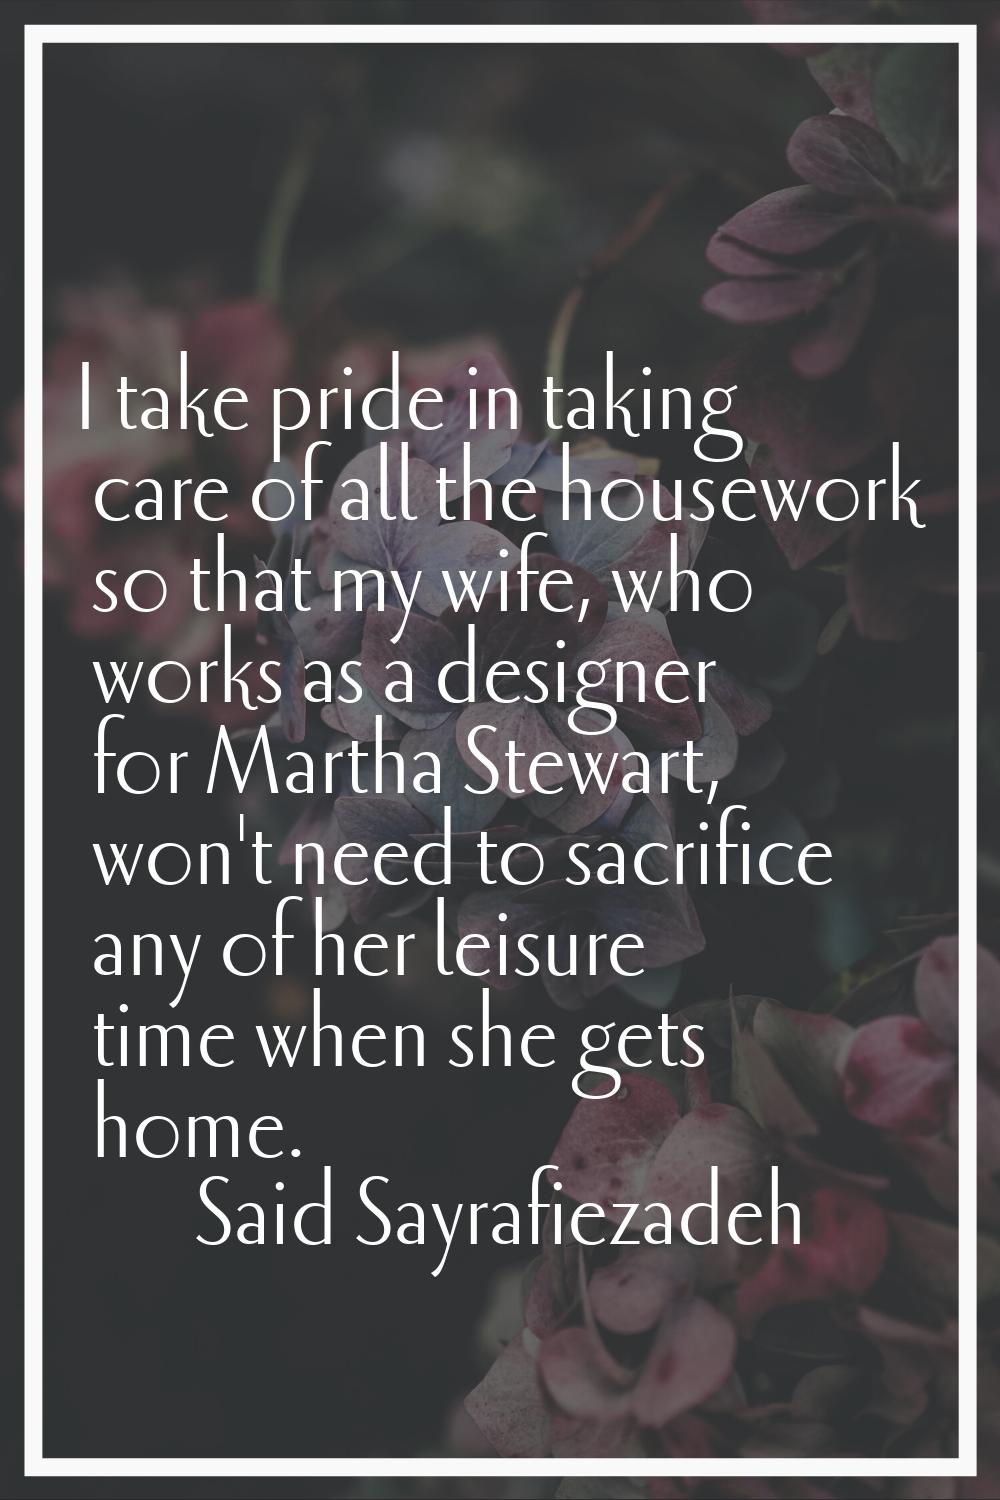 I take pride in taking care of all the housework so that my wife, who works as a designer for Marth